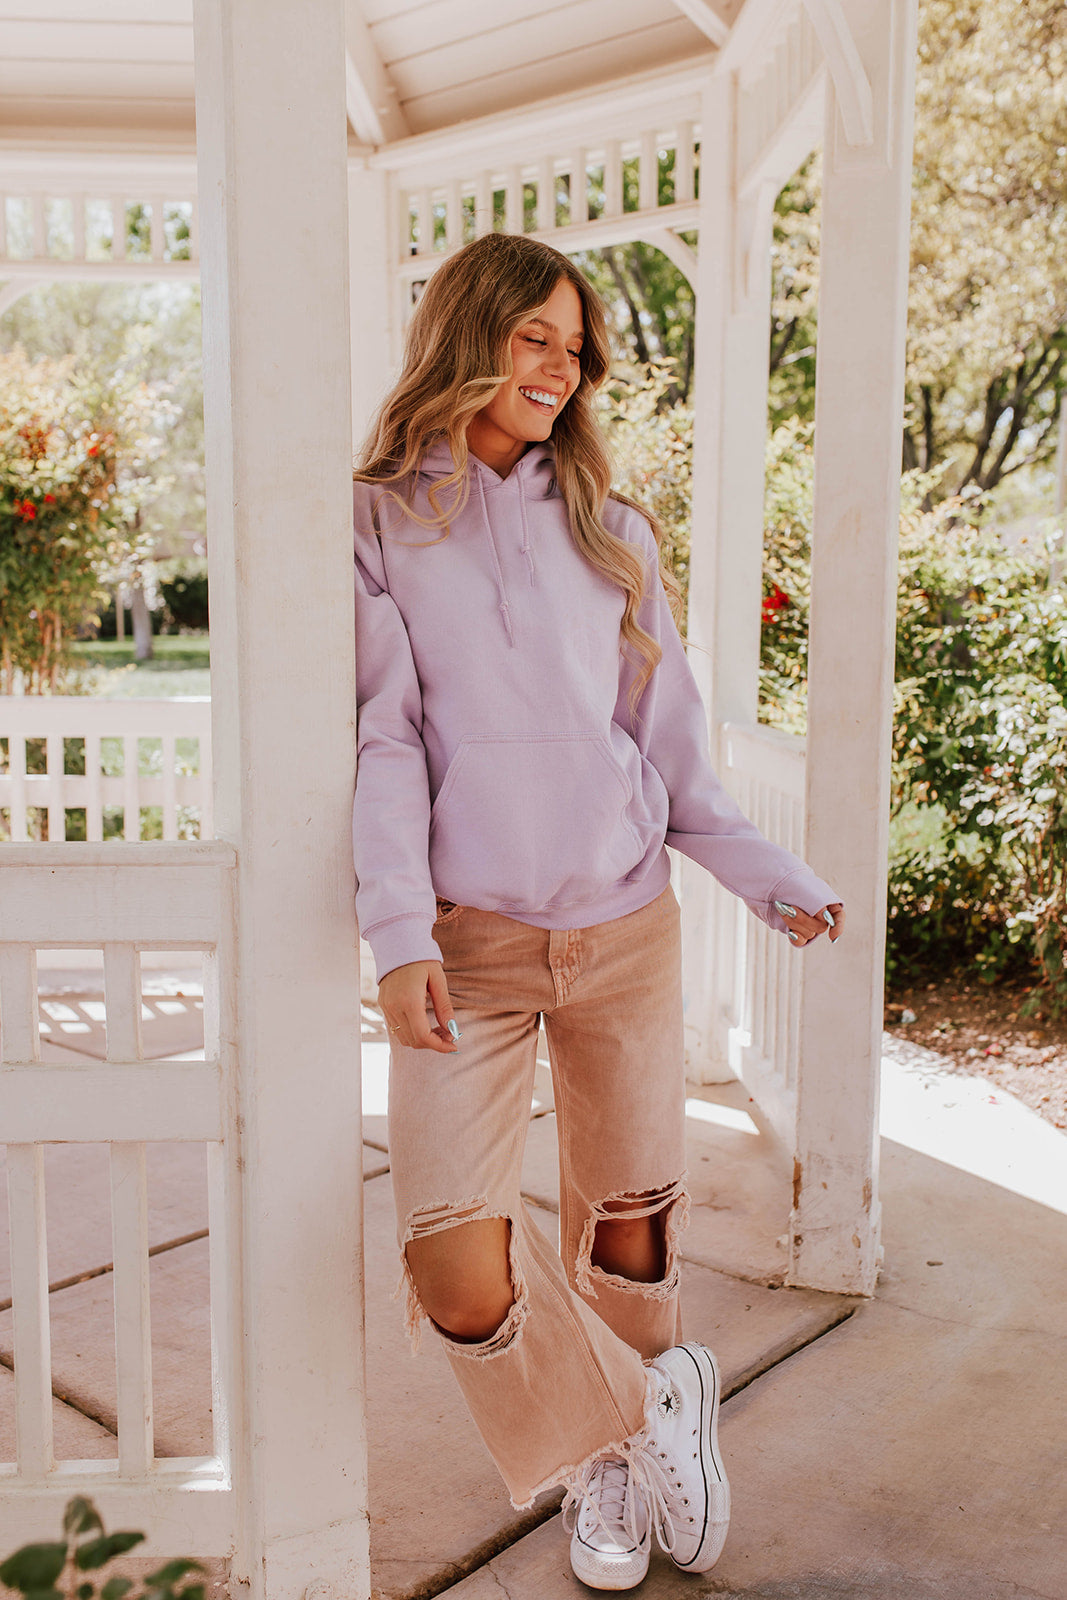 THE LET HER FLY BUTTERFLY HOODIE IN LAVENDER BY PINK DESERT